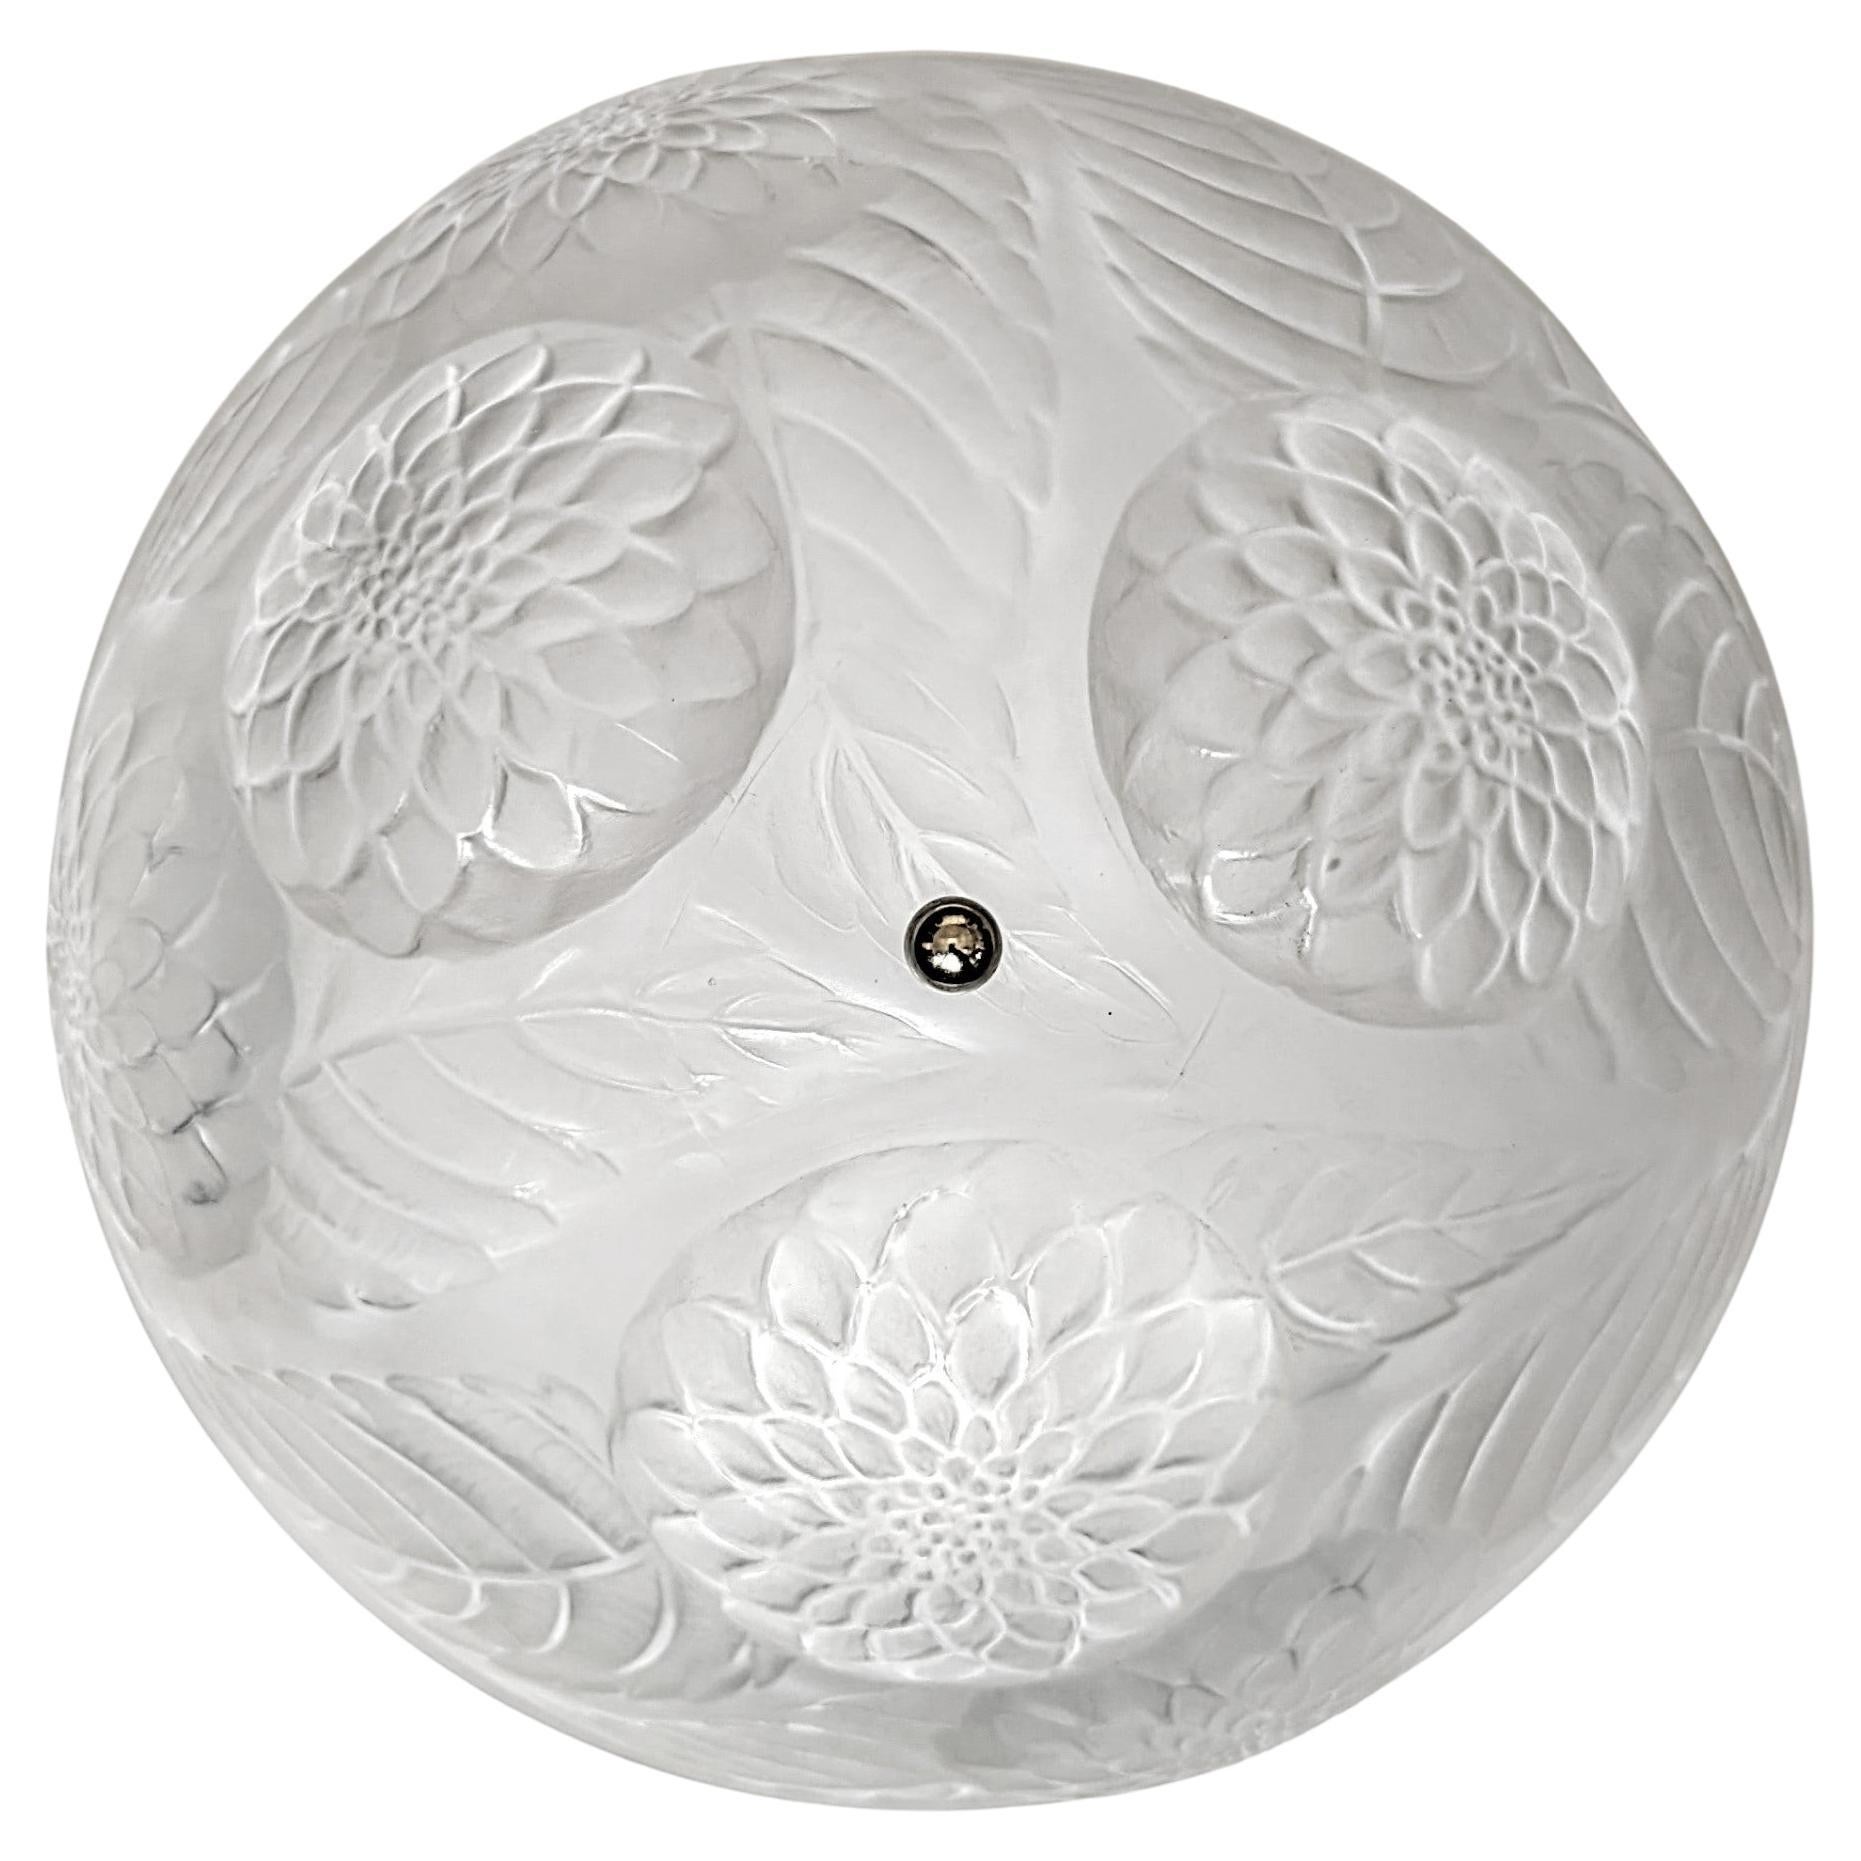 French Art Deco Flush Mount by René Lalique model Dahlias was designed in 1921 in great condition. Hemispherical clear coupe decorated in relief with dahlia blossoms and leaves. Coupe marked on the inside: R.Lalique. Rewired to U.S standards. It can